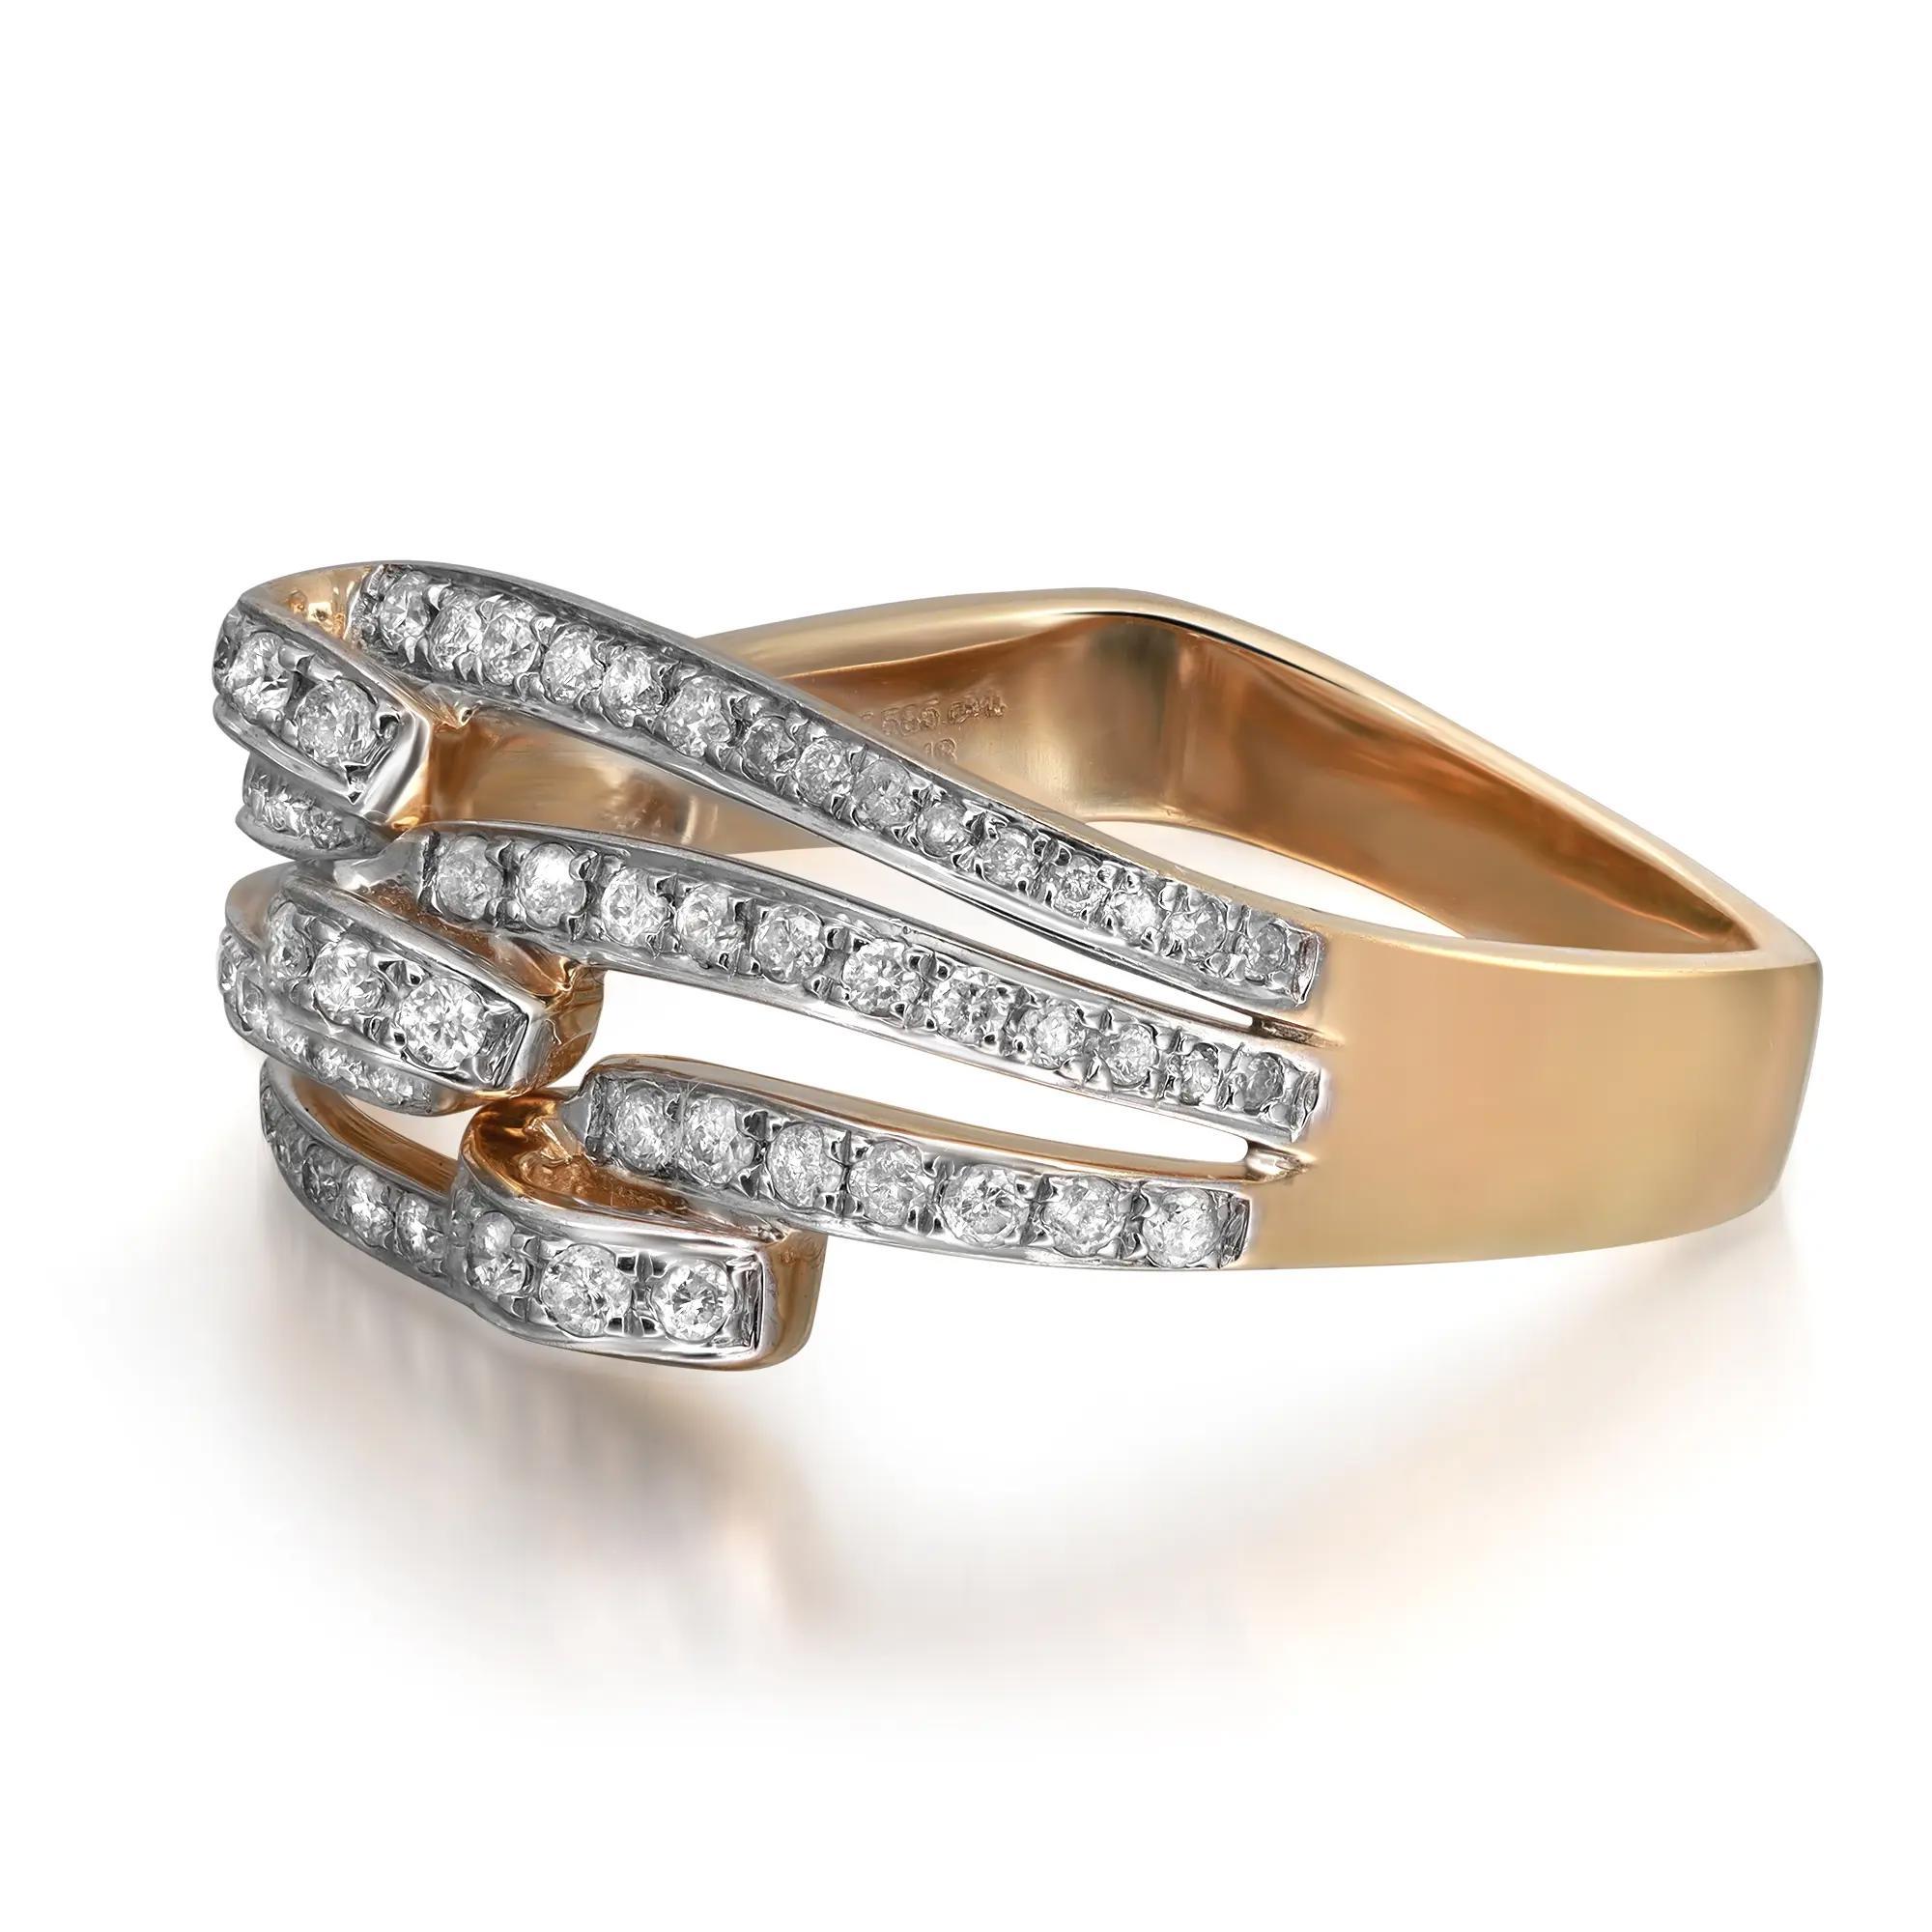 Modern 0.55Cttw Round Cut Diamond Ladies Square Cocktail Ring 14K Yellow Gold Size 7.5 For Sale